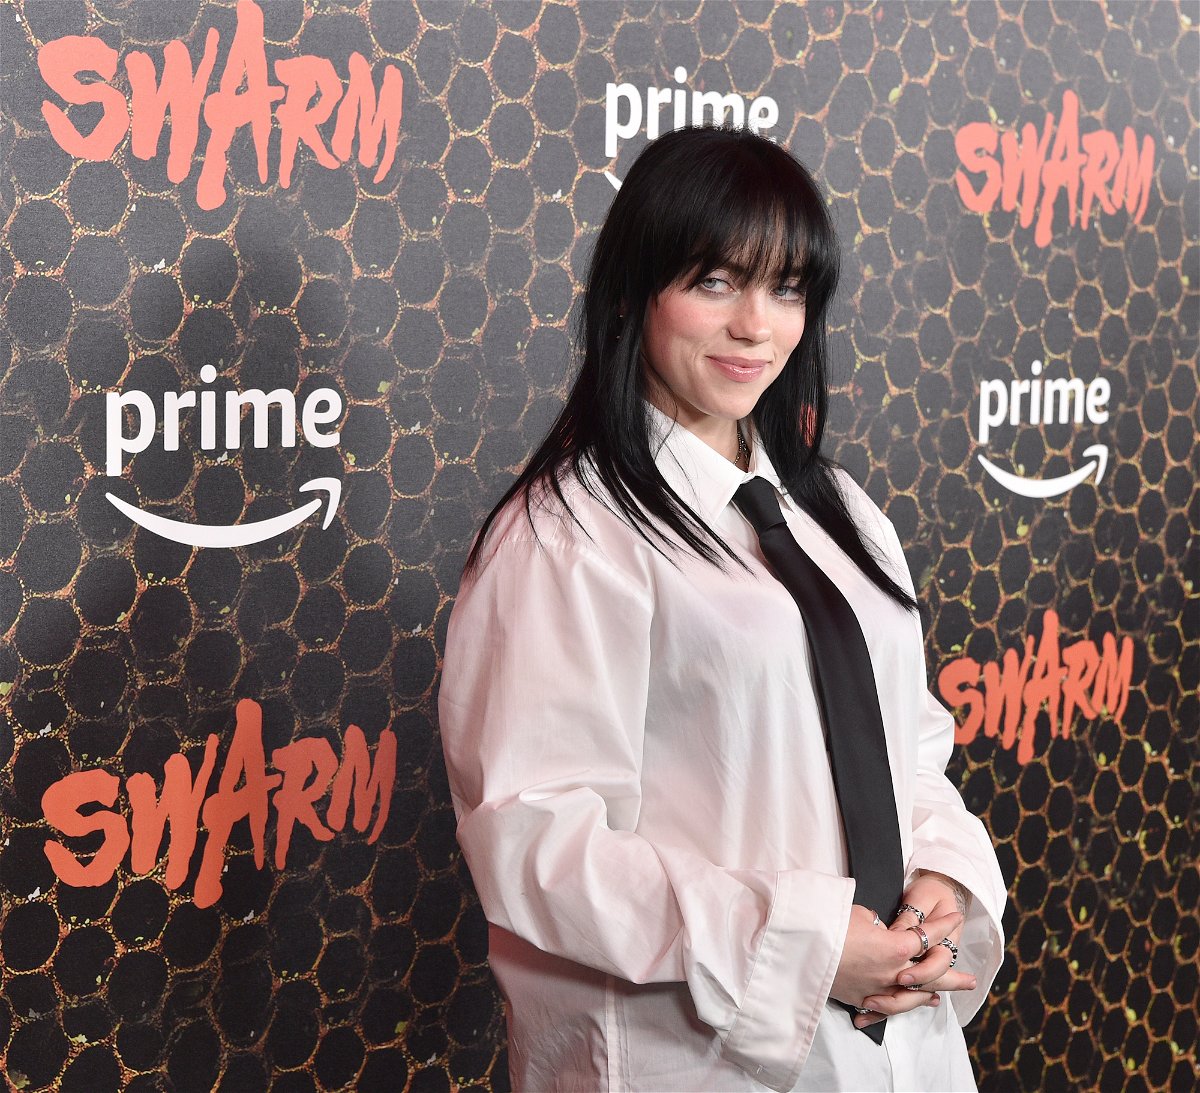 <i>Gregg DeGuire/FilmMagic/Getty Images</i><br/>Billie Eilish has made a surprise acting debut in an episode of Donald Glover's new thriller series